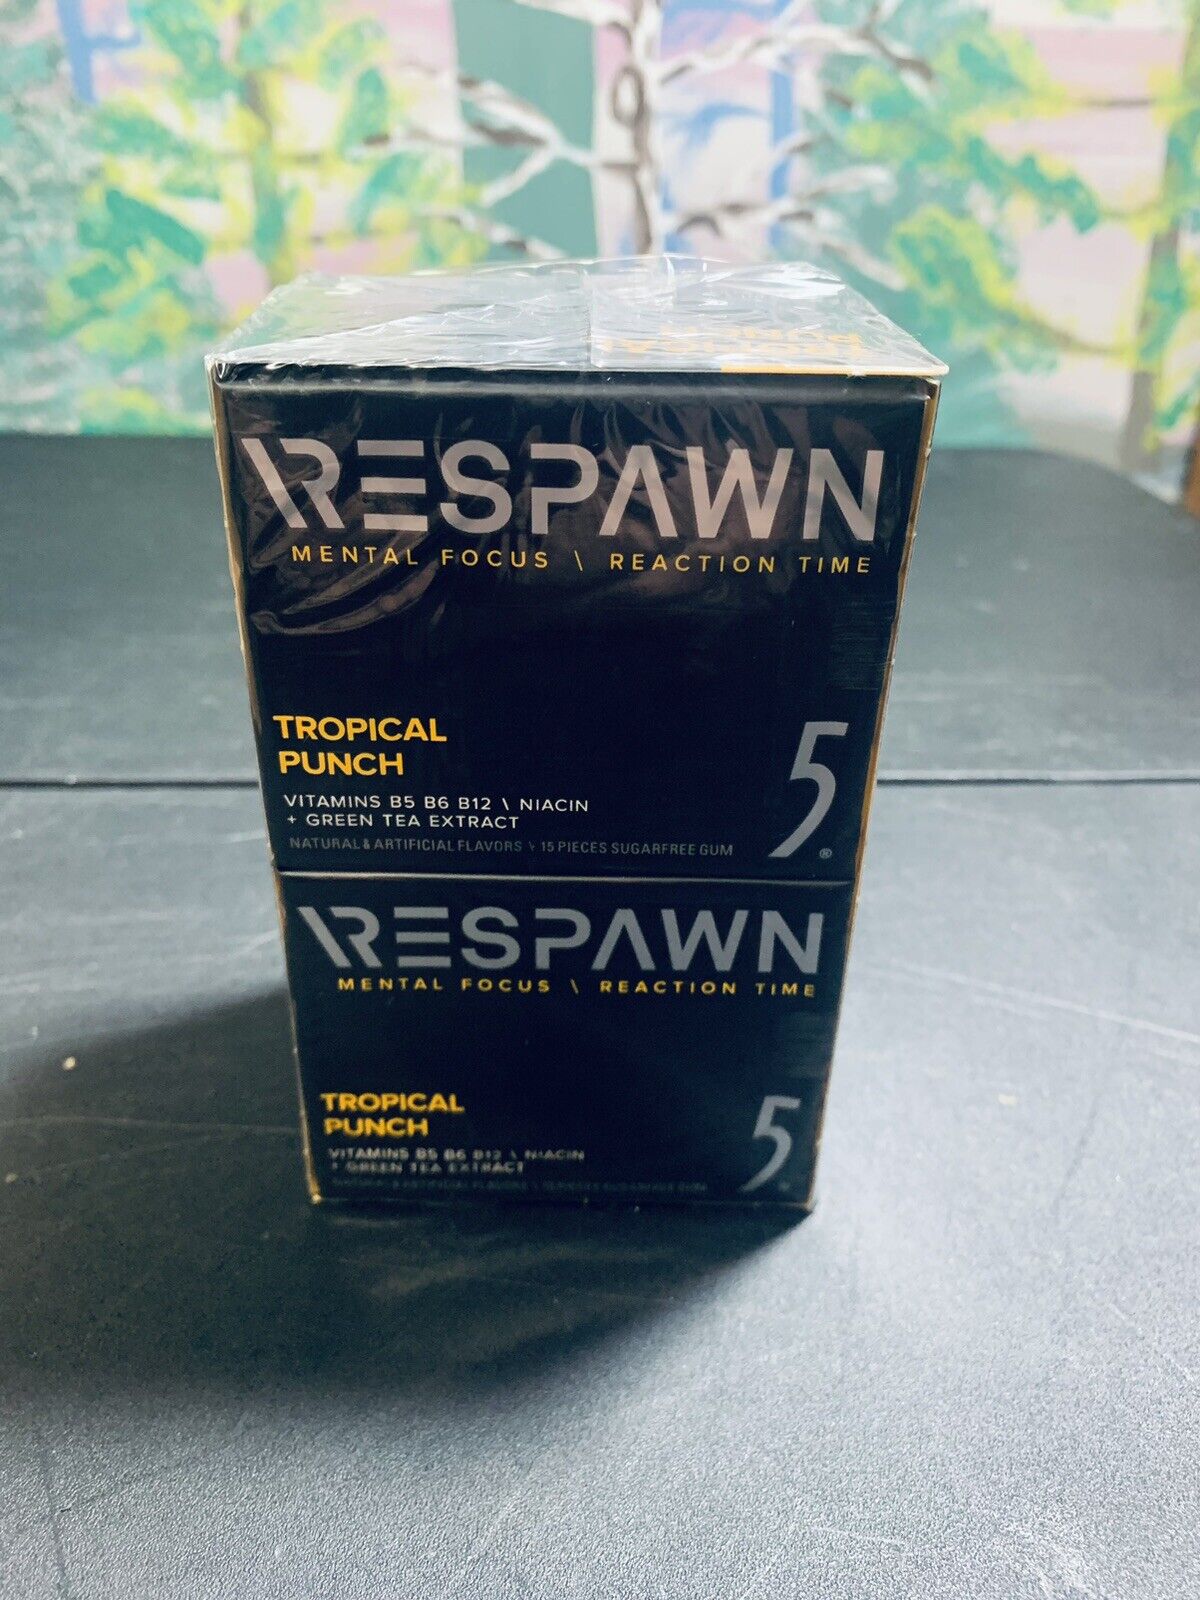 Respawn 5 gum, Tropical Punch, Discontinued Collectible (one sealed box of 10pk)